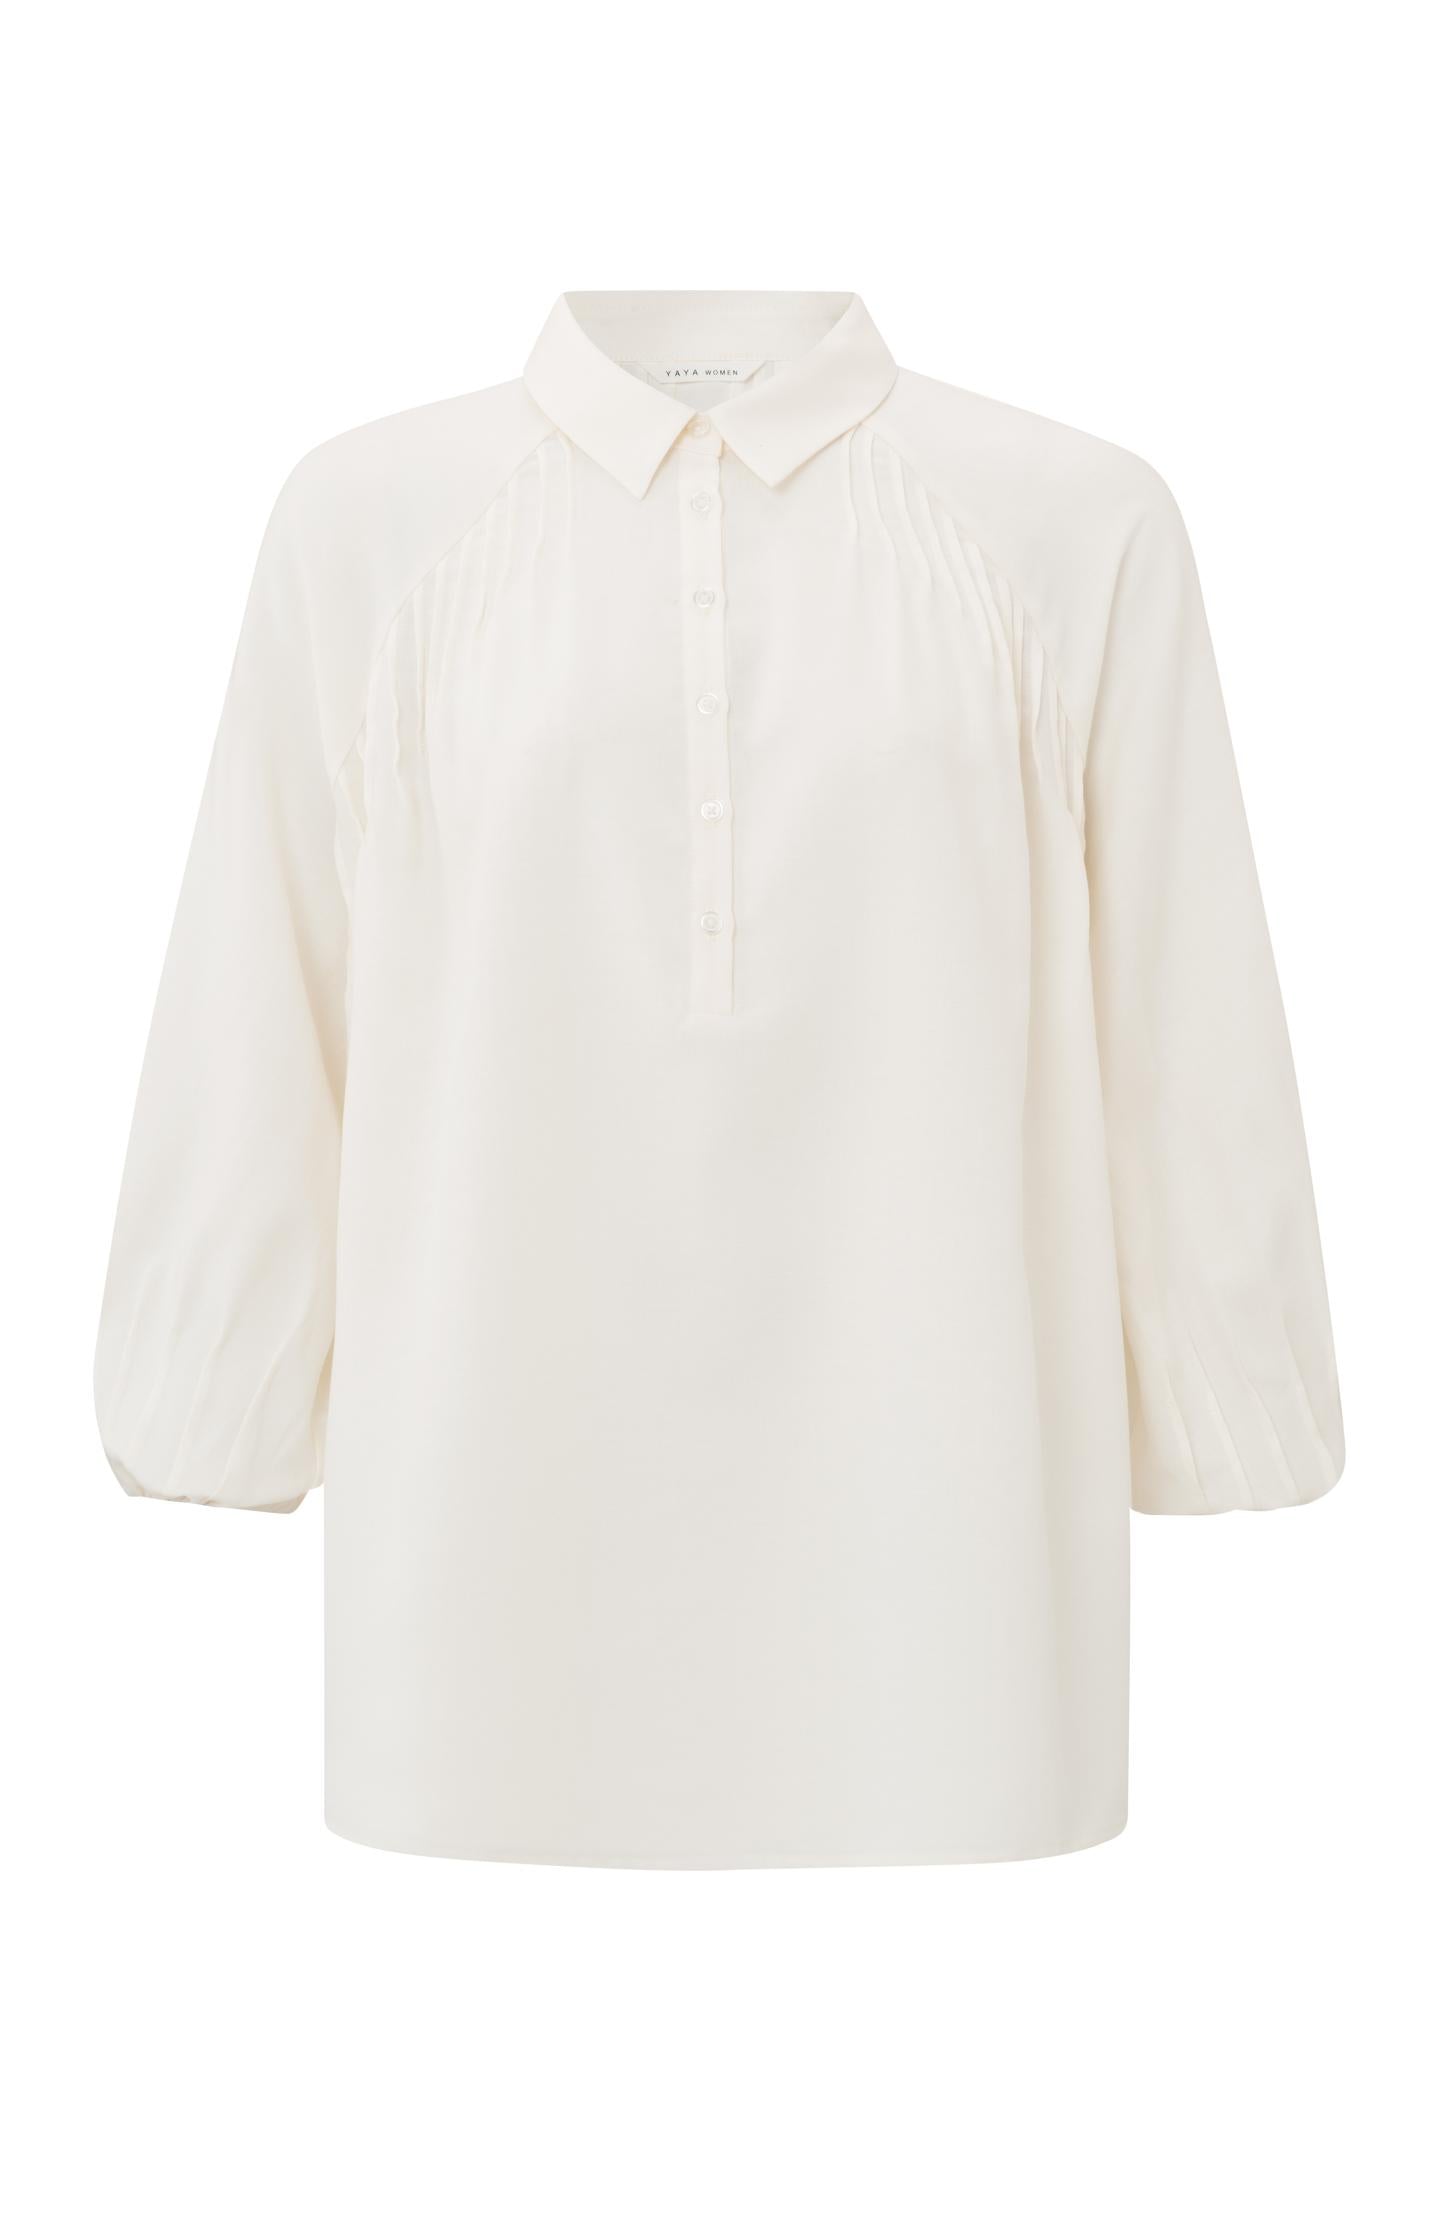 Woven top with collar, 7/8 raglan sleeves and pleated detail - Type: product